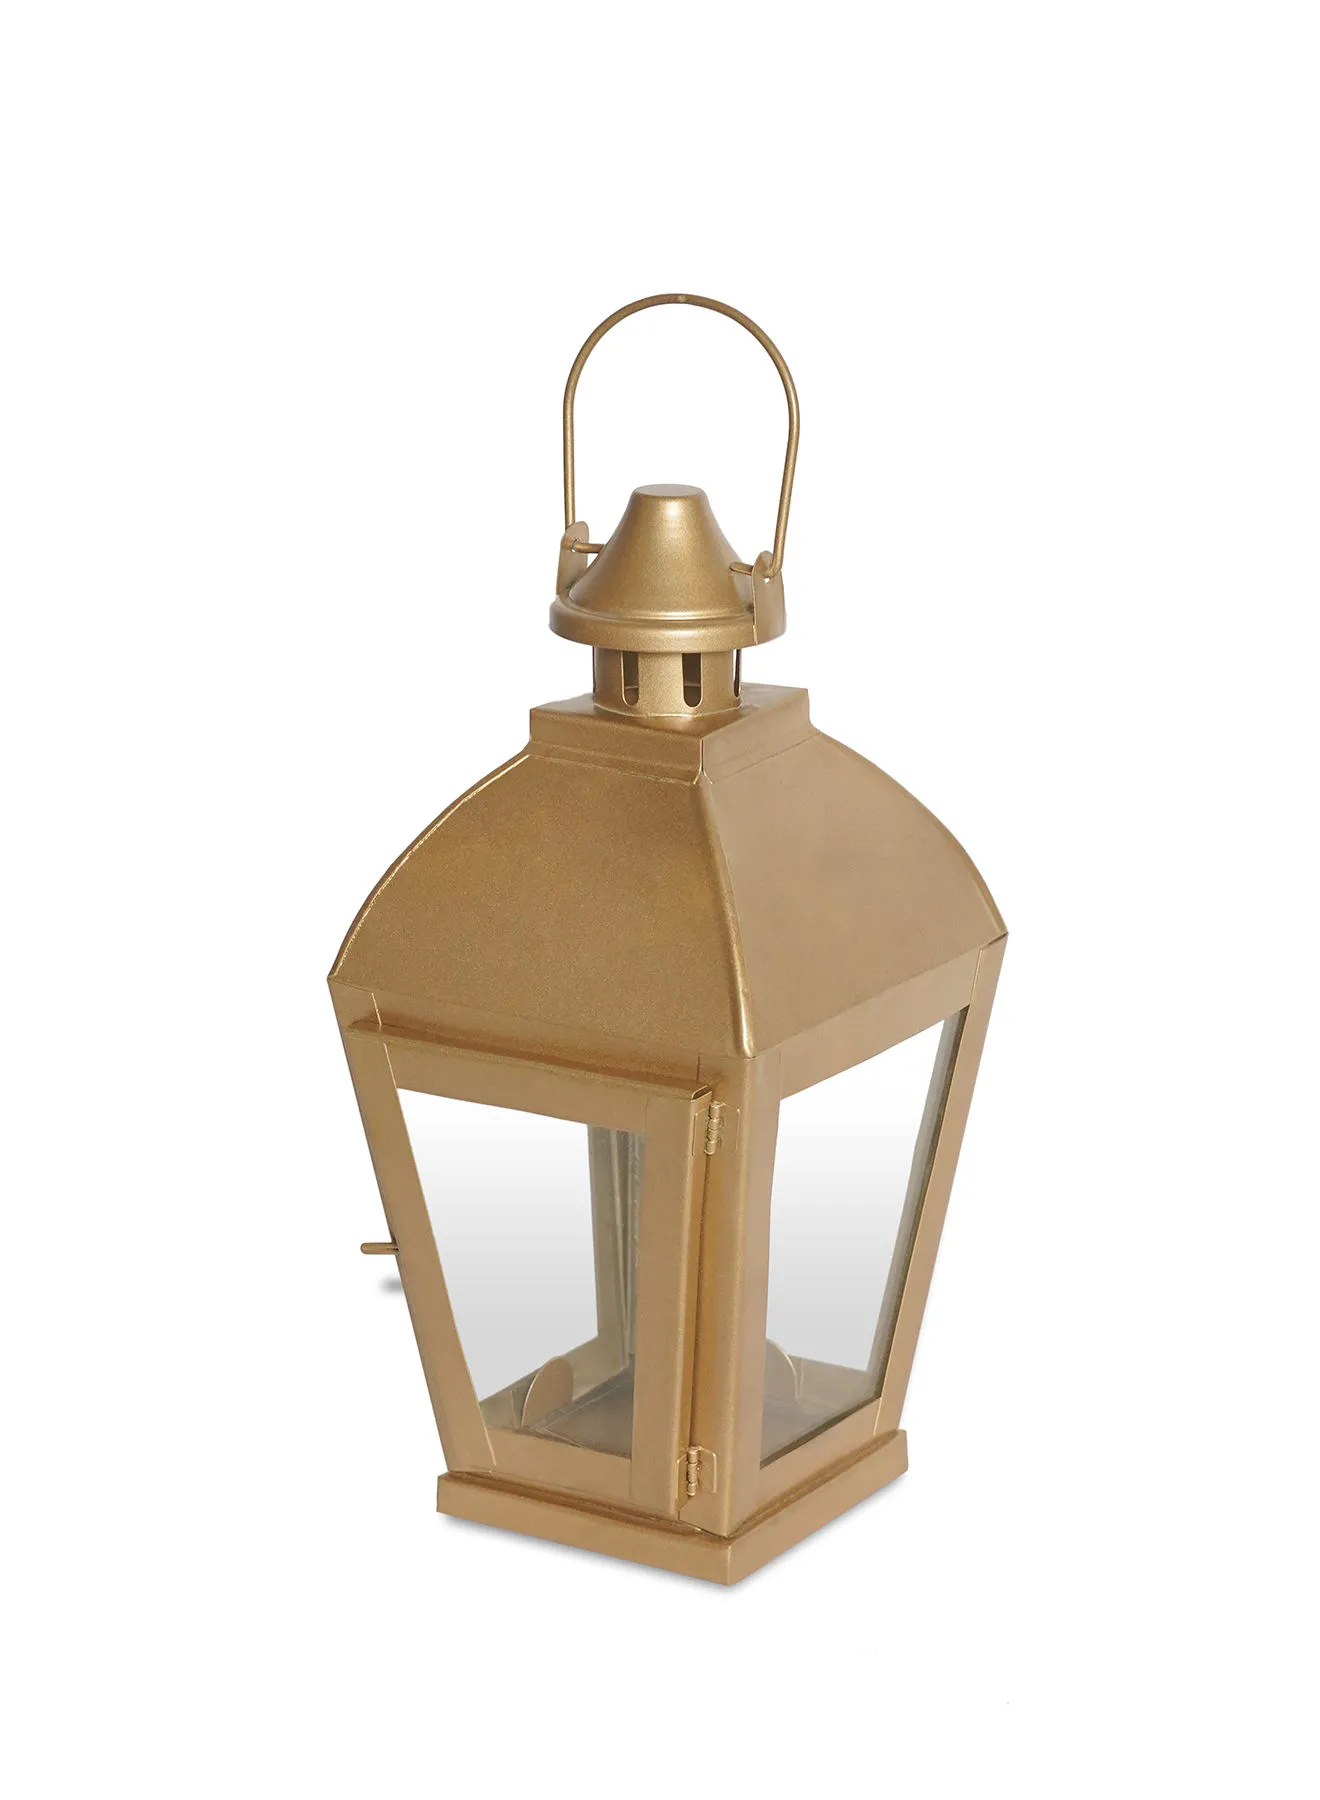 ebb & flow Modern Ideal Design Handmade Lantern Unique Luxury Quality Scents For The Perfect Stylish Home Gold 8.63X8.63X27centimeter